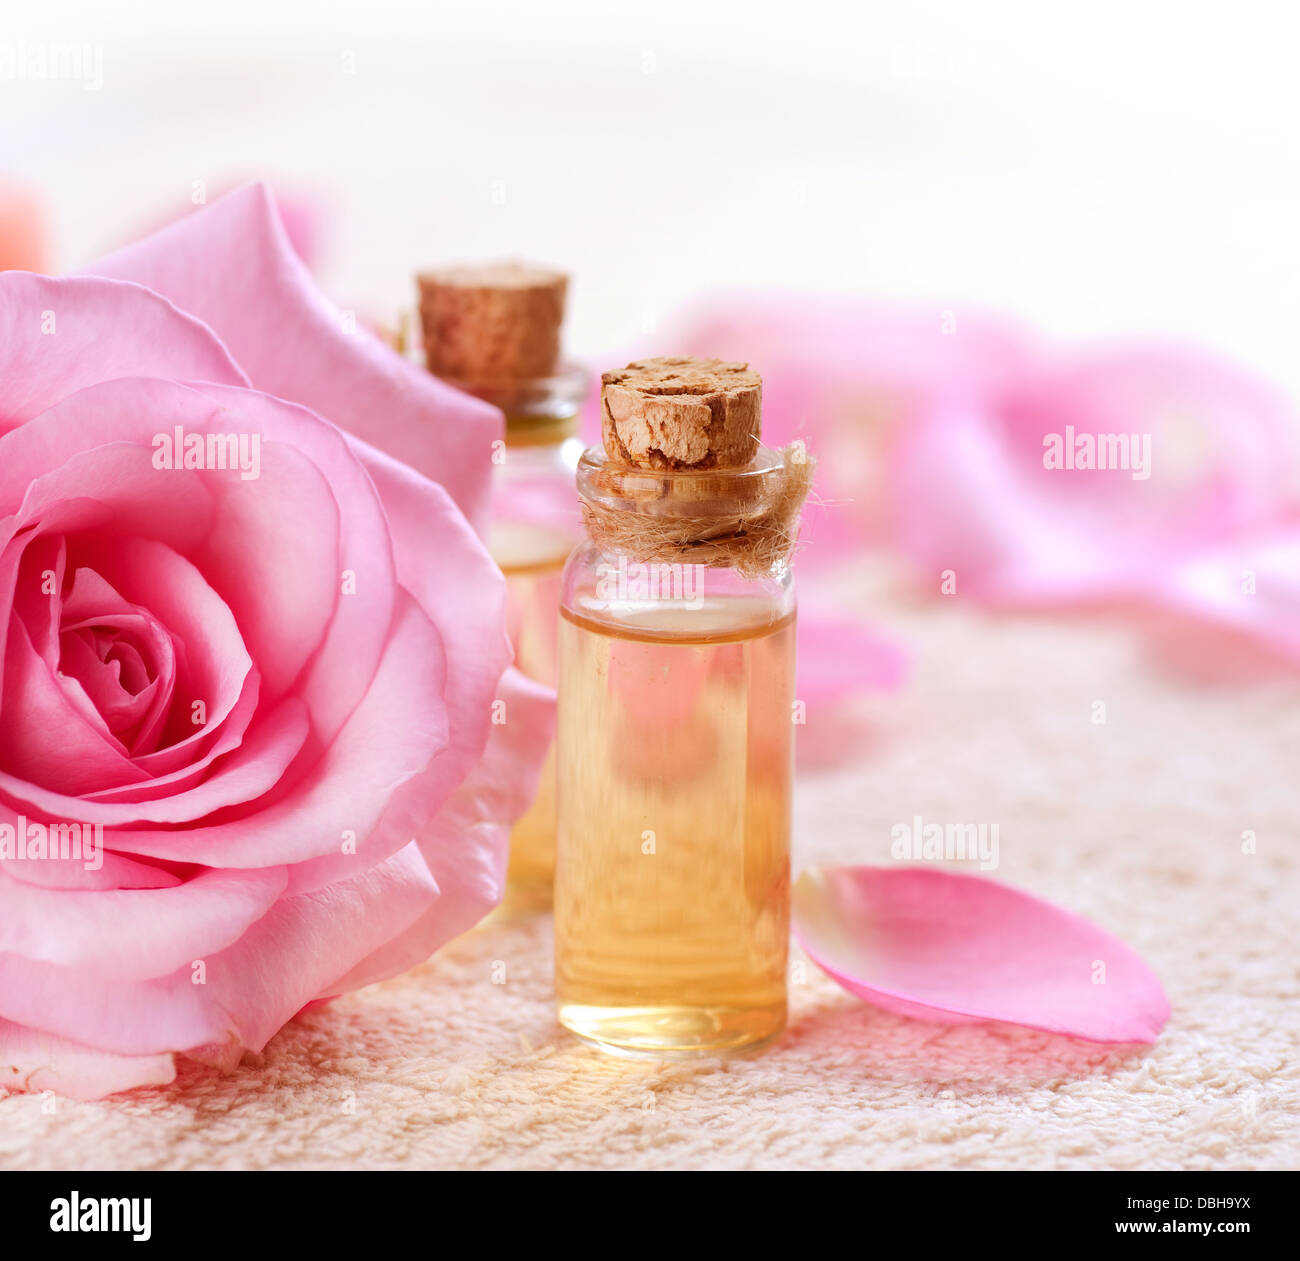 Bottles of Essential Oil for Aromatherapy. Rose Spa Stock Photo